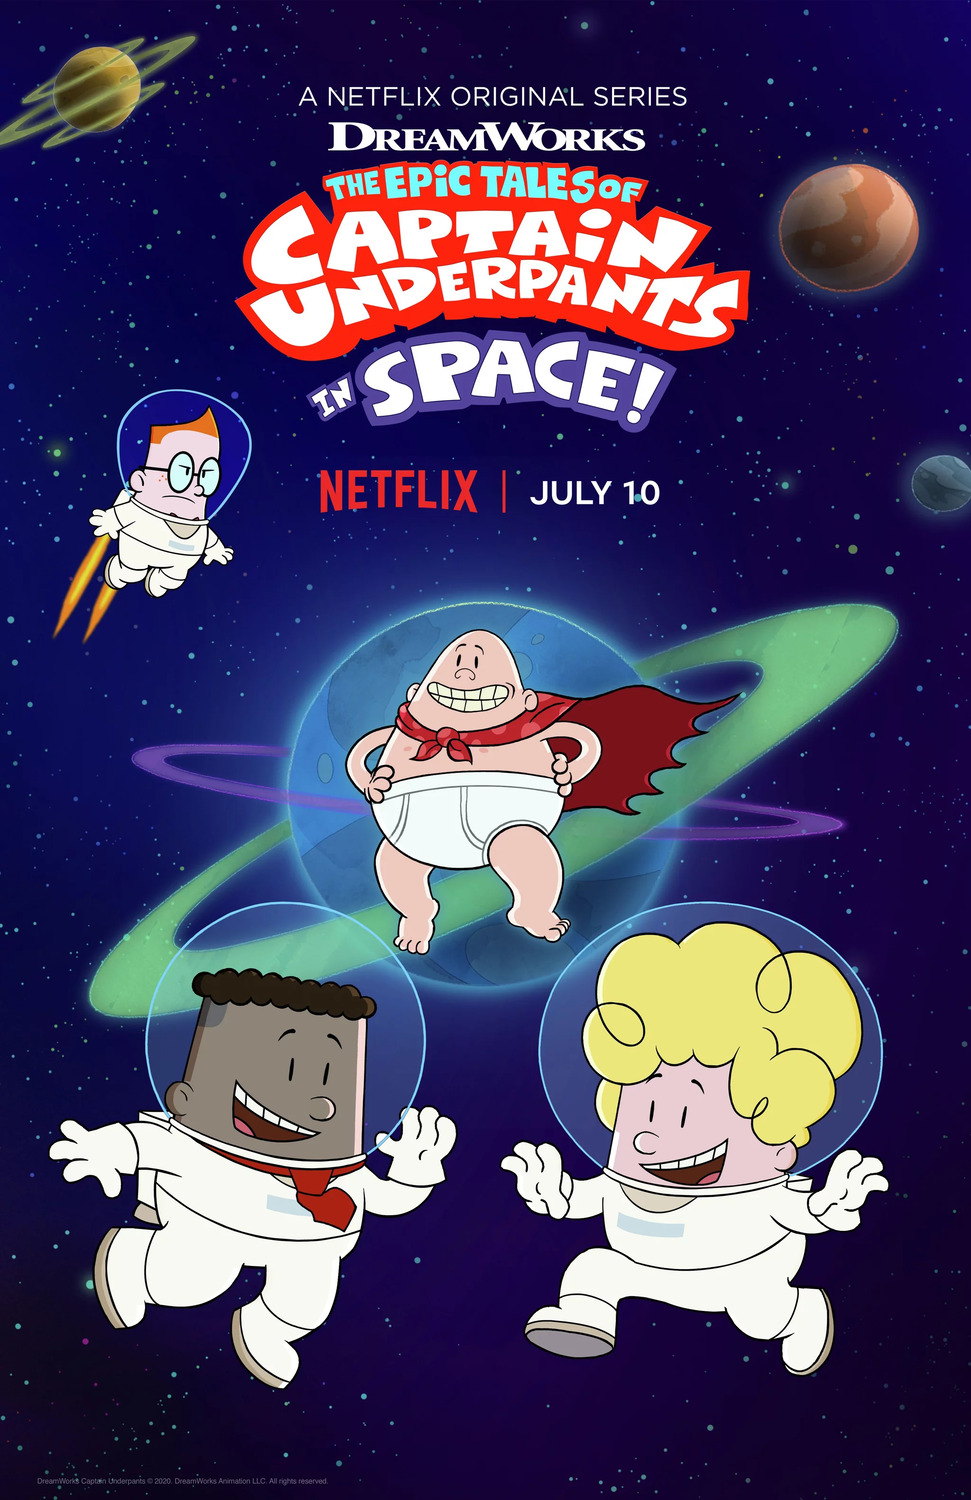 Extra Large TV Poster Image for The Epic Tales of Captain Underpants (#2 of 2)